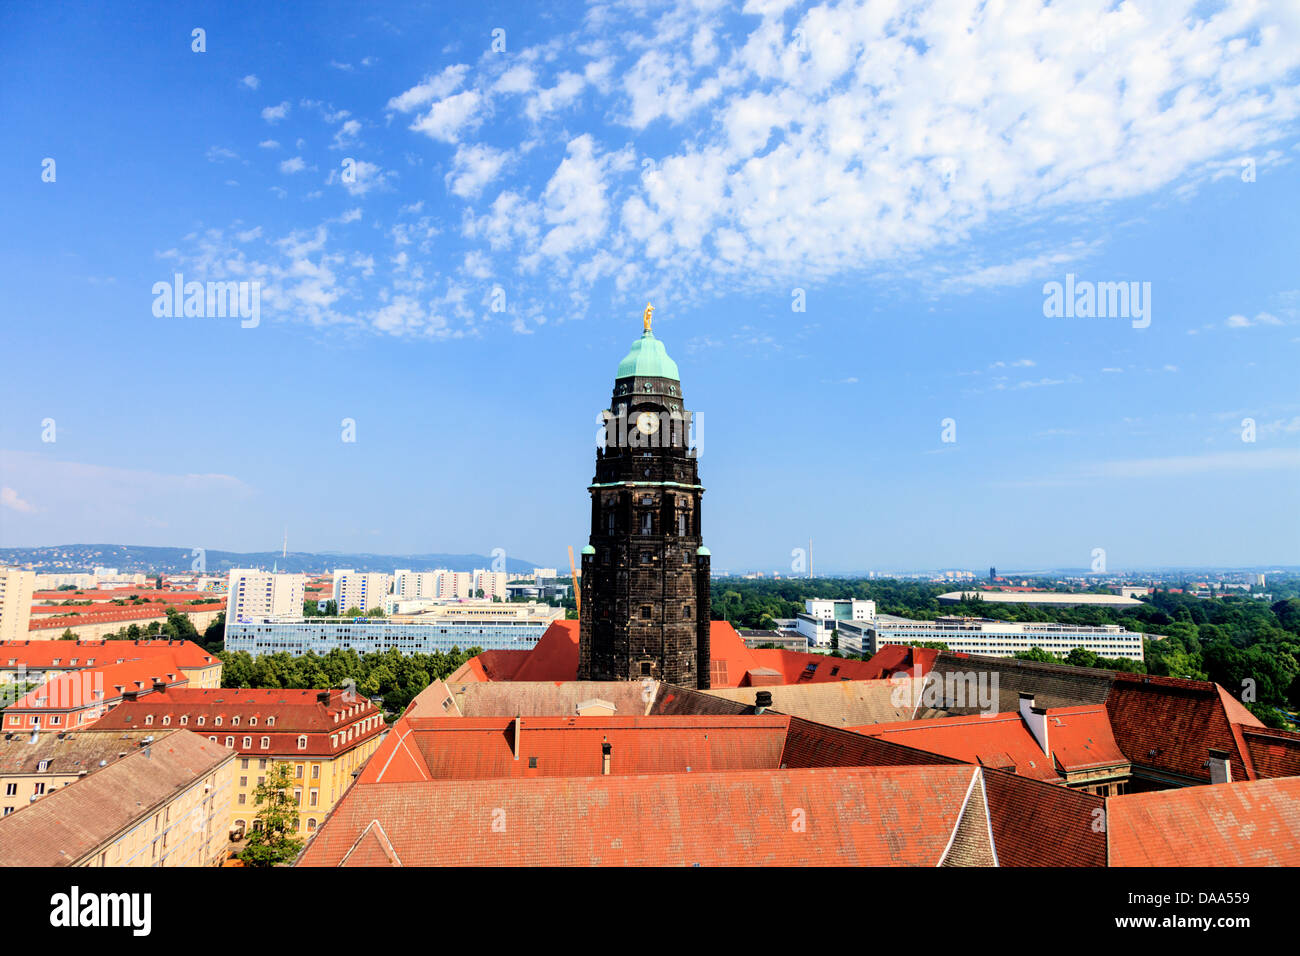 bell tower over the tiled roofs Stock Photo